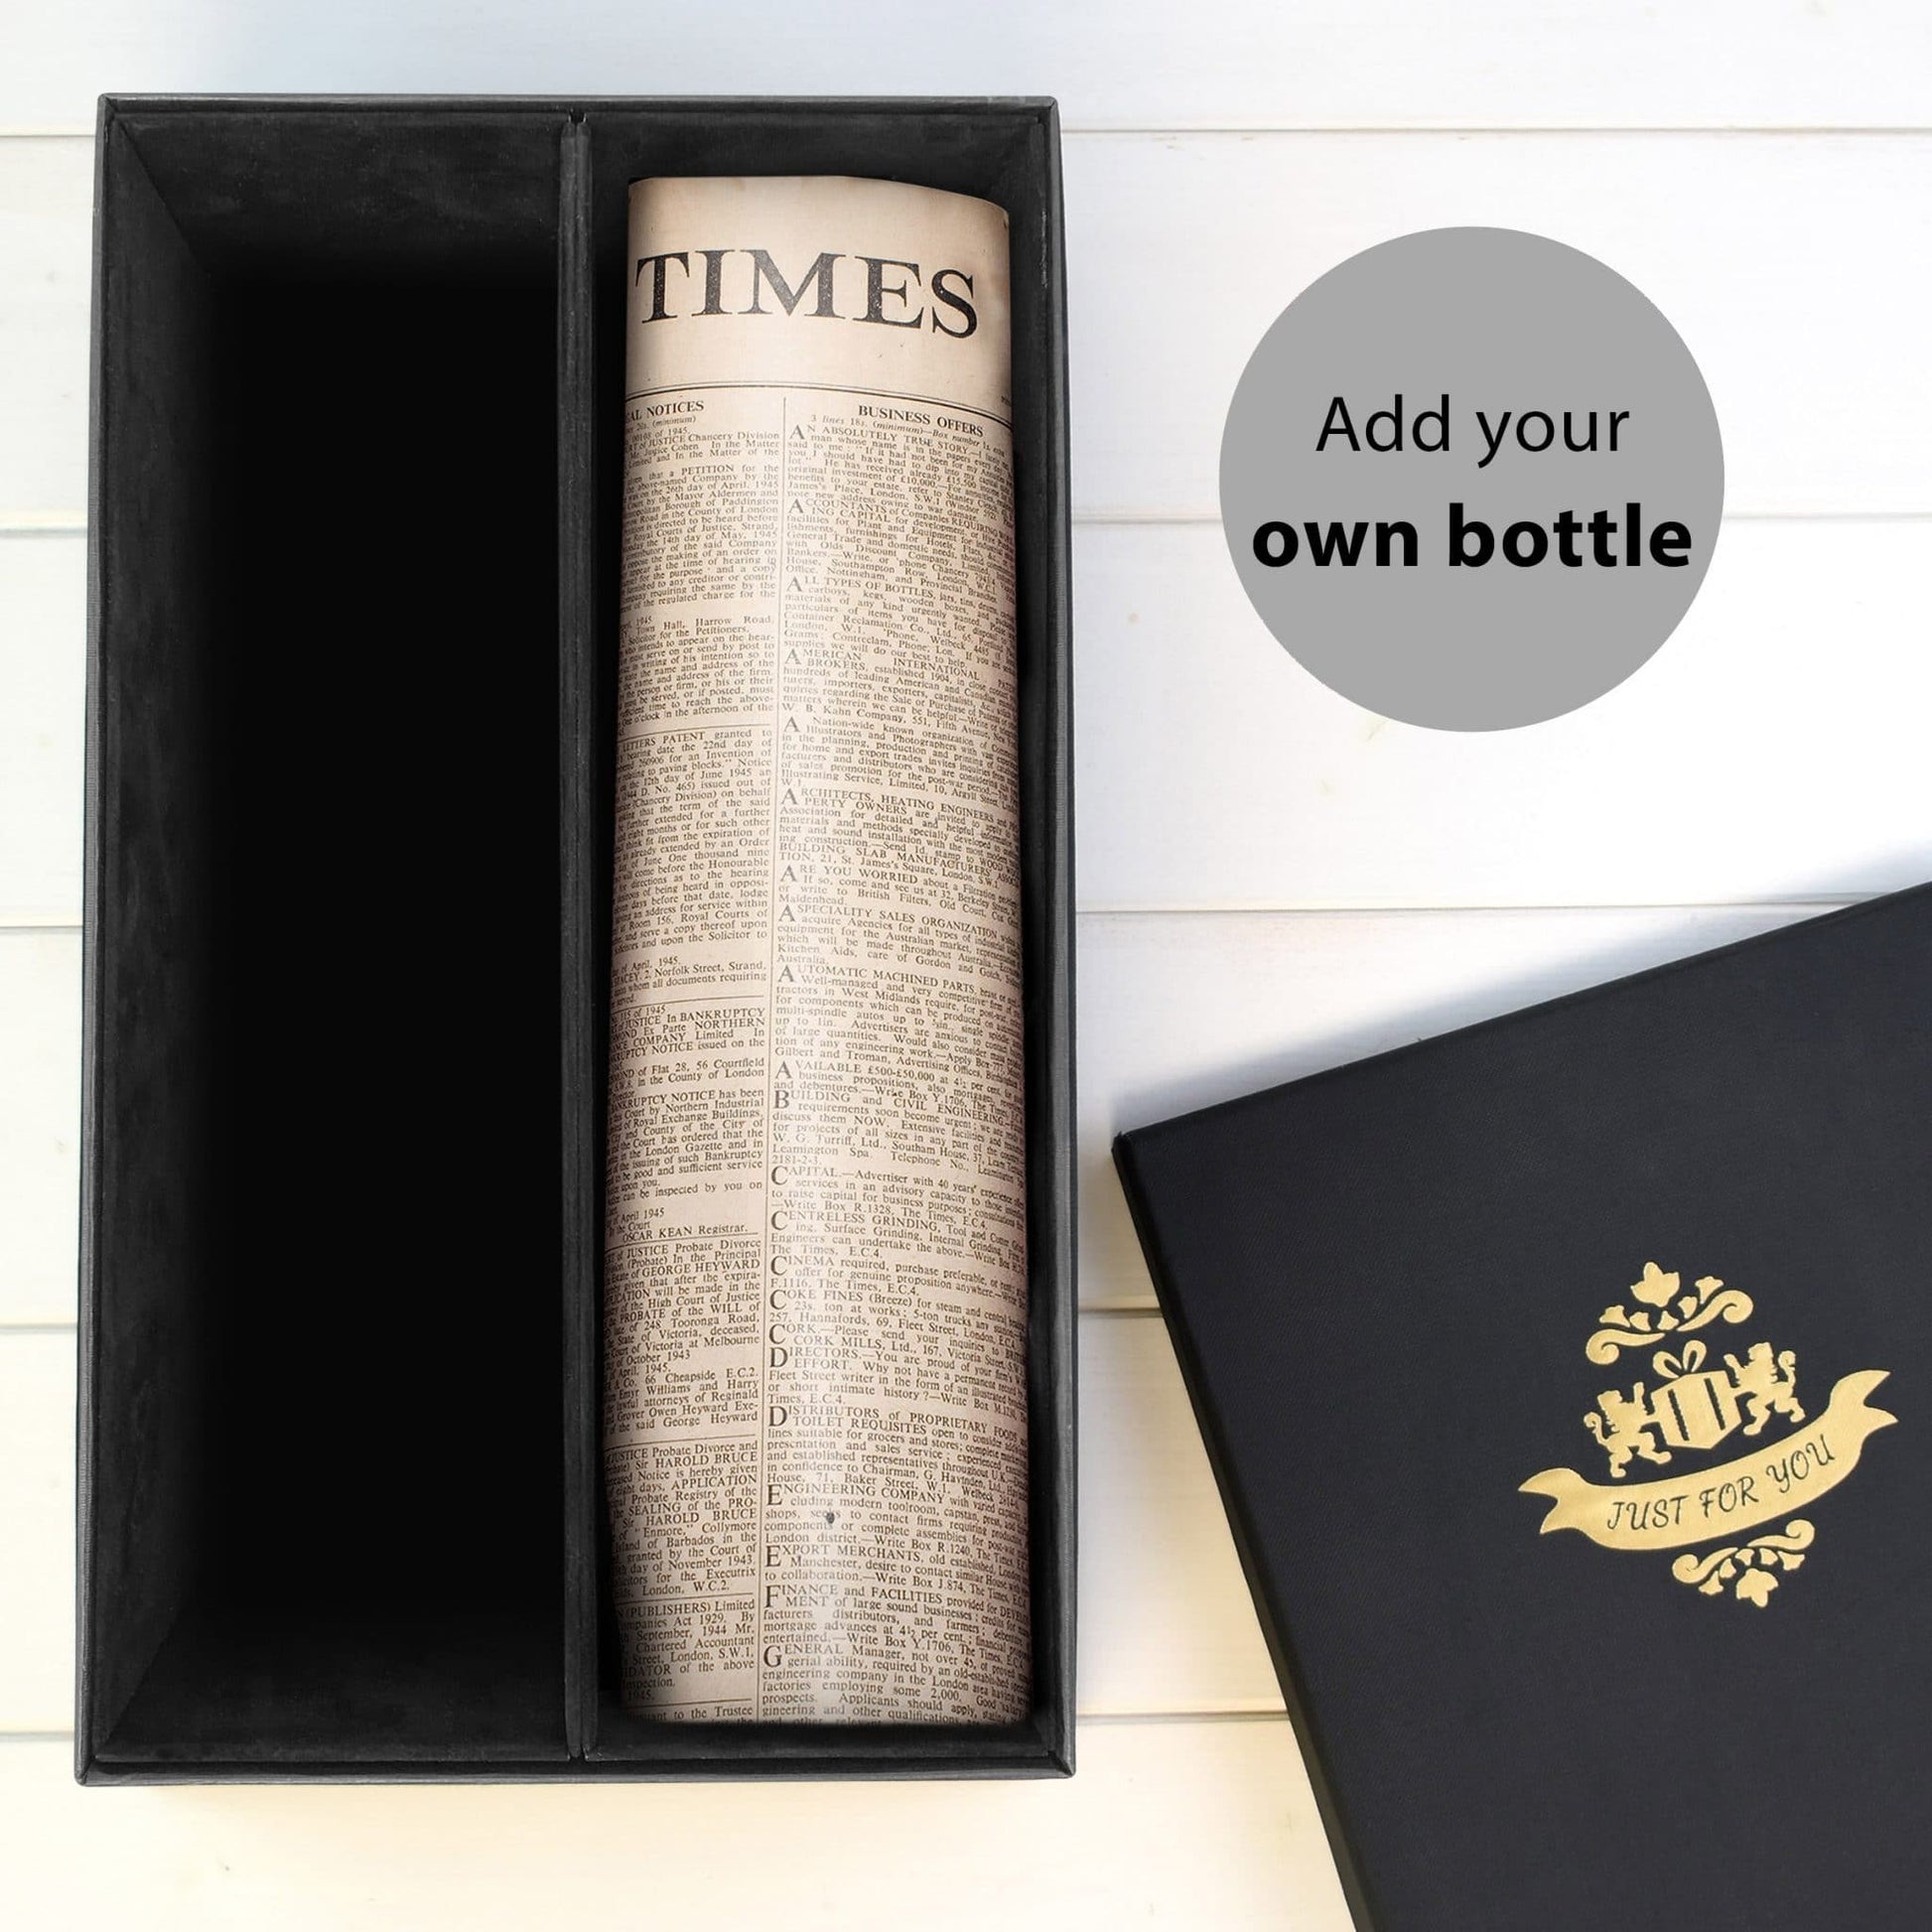 Original Newspaper & ‘Your Choice’ of Alcohol Bottle in Gift Box